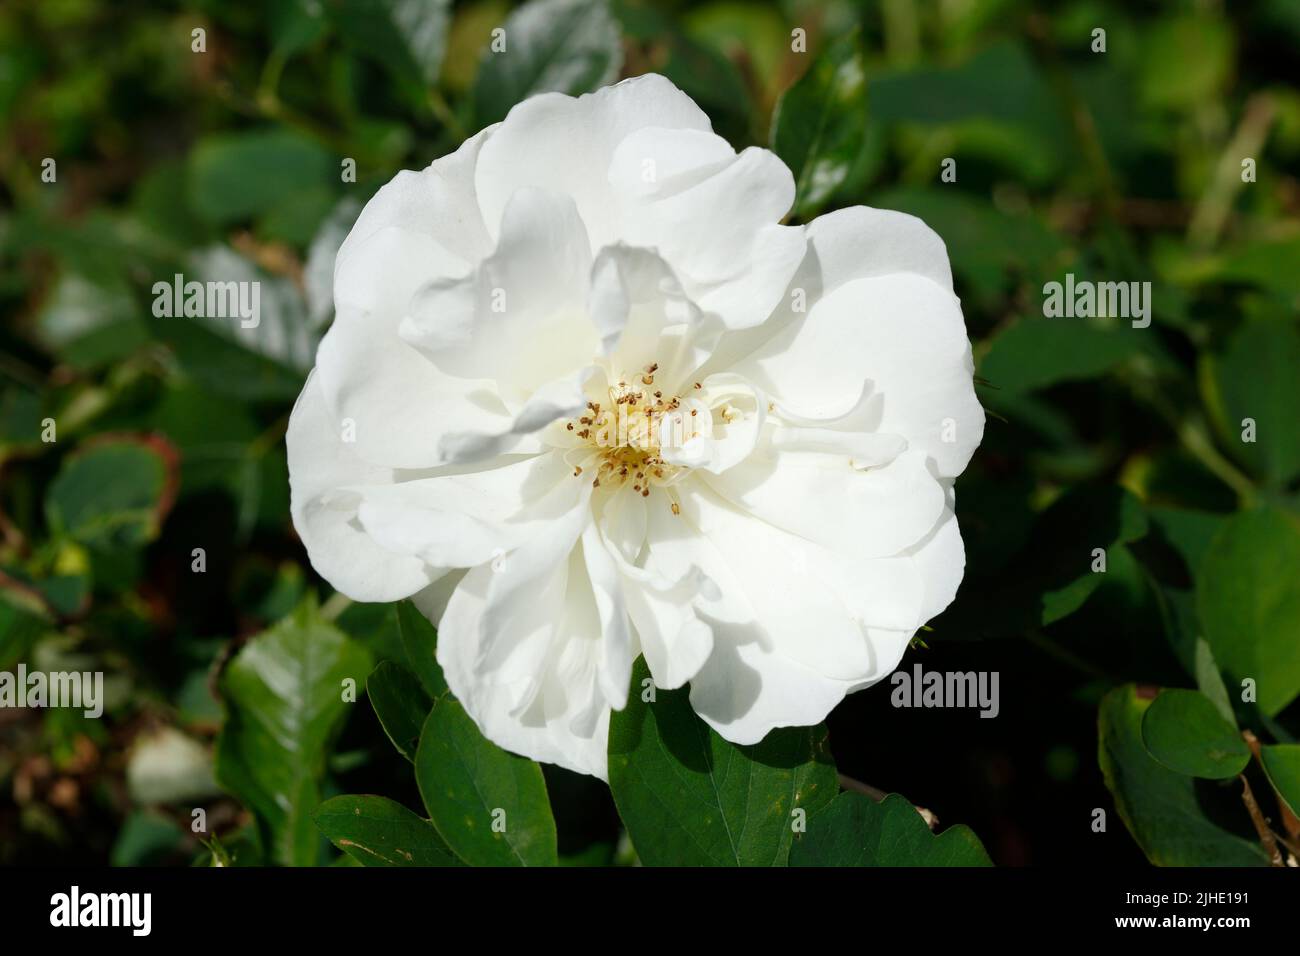 White roses, green background, Germany Stock Photo